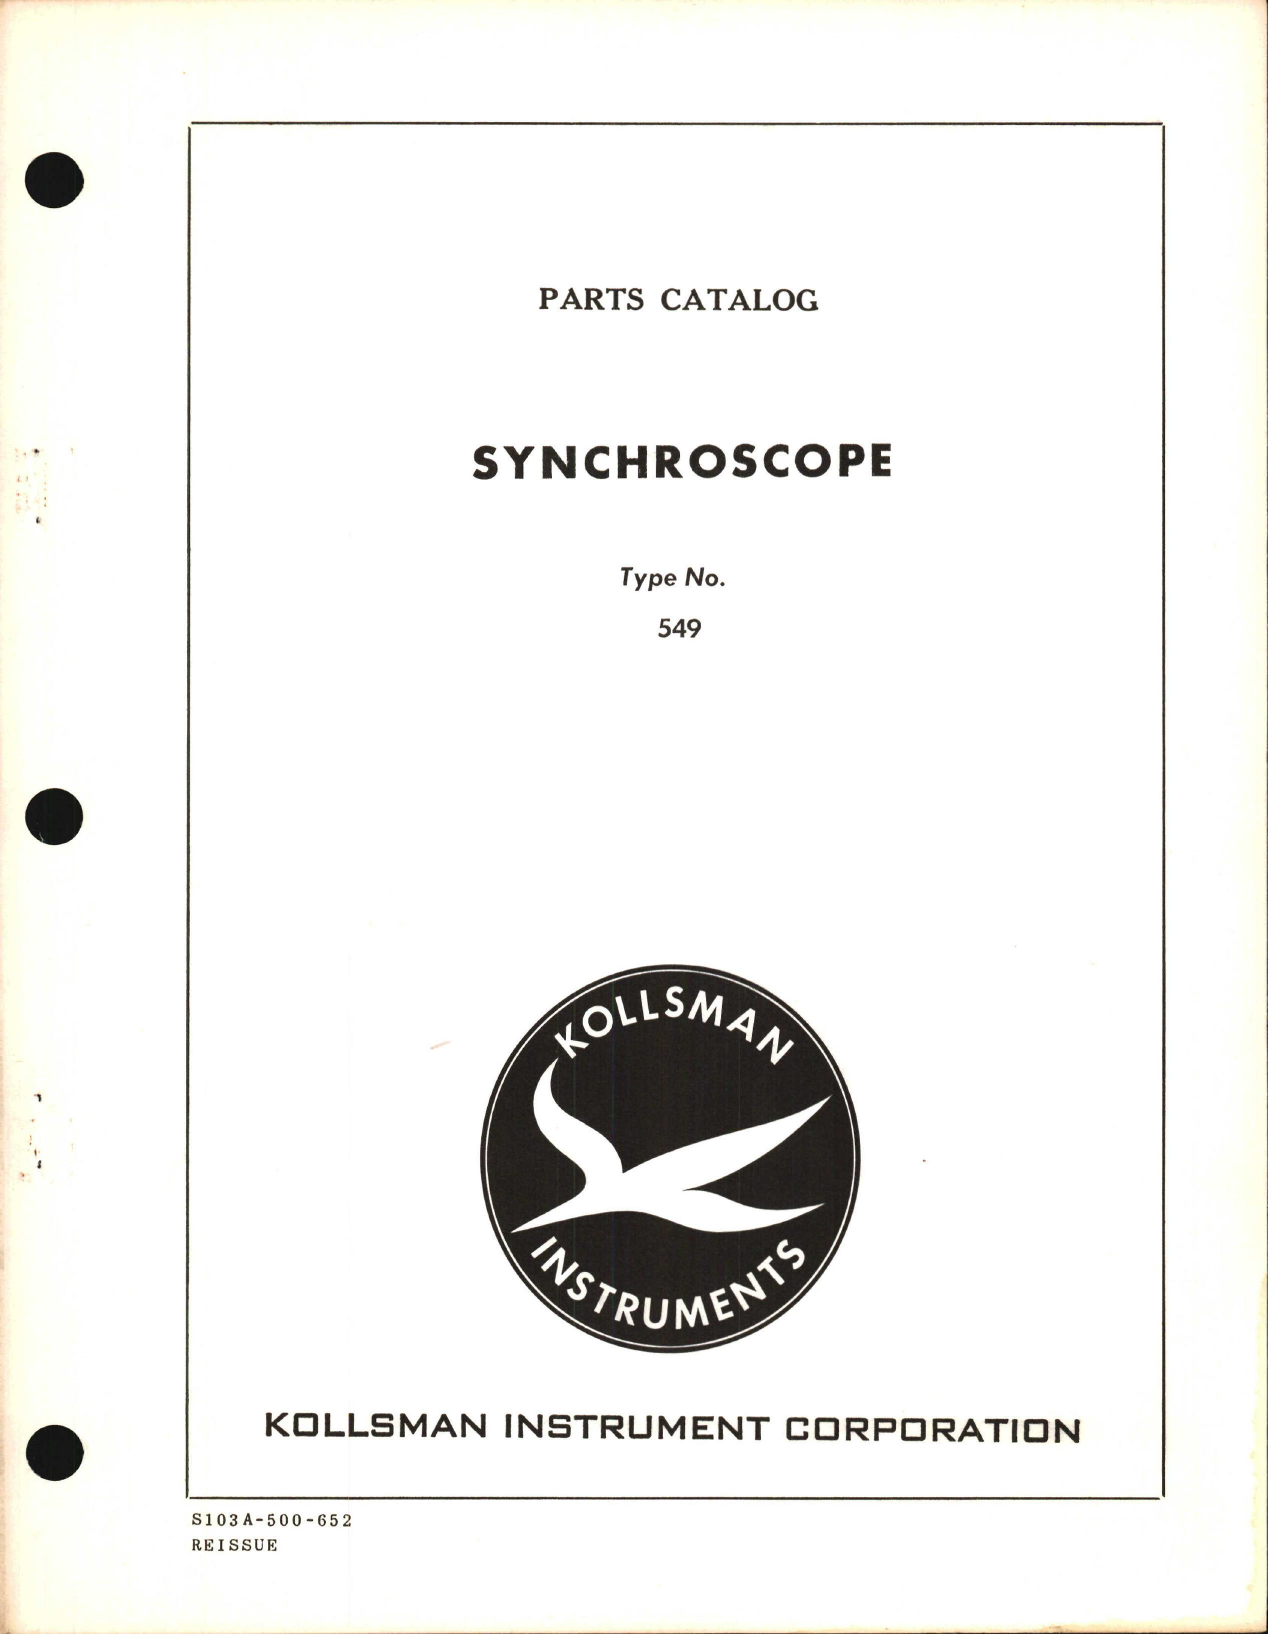 Sample page 1 from AirCorps Library document: Parts Catalog for Kollsman Synchroscope 549